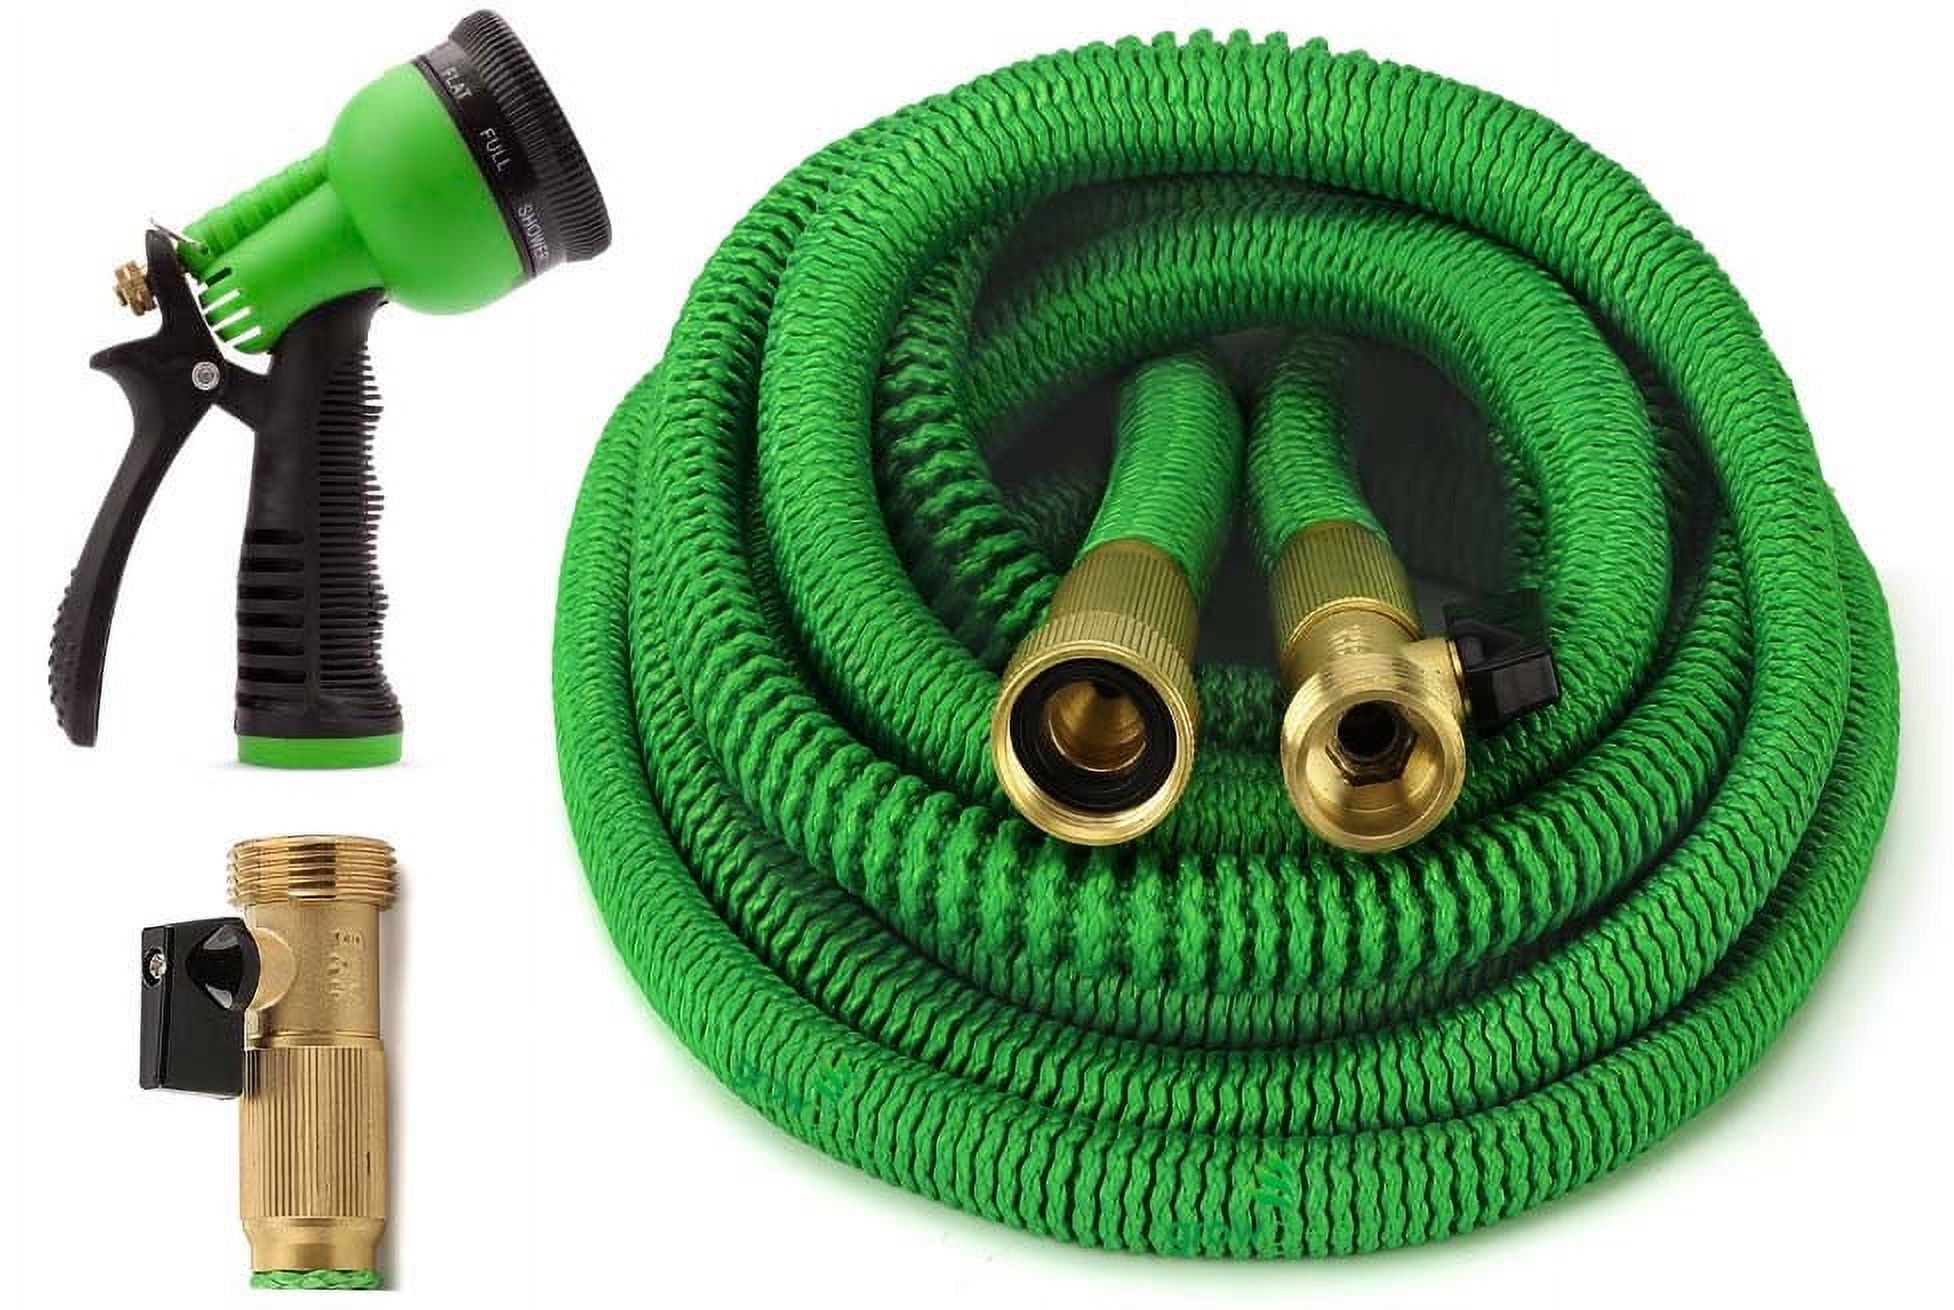 GrowGreen 50' Expandable Garden Water Hose Set with Nozzle - image 1 of 7